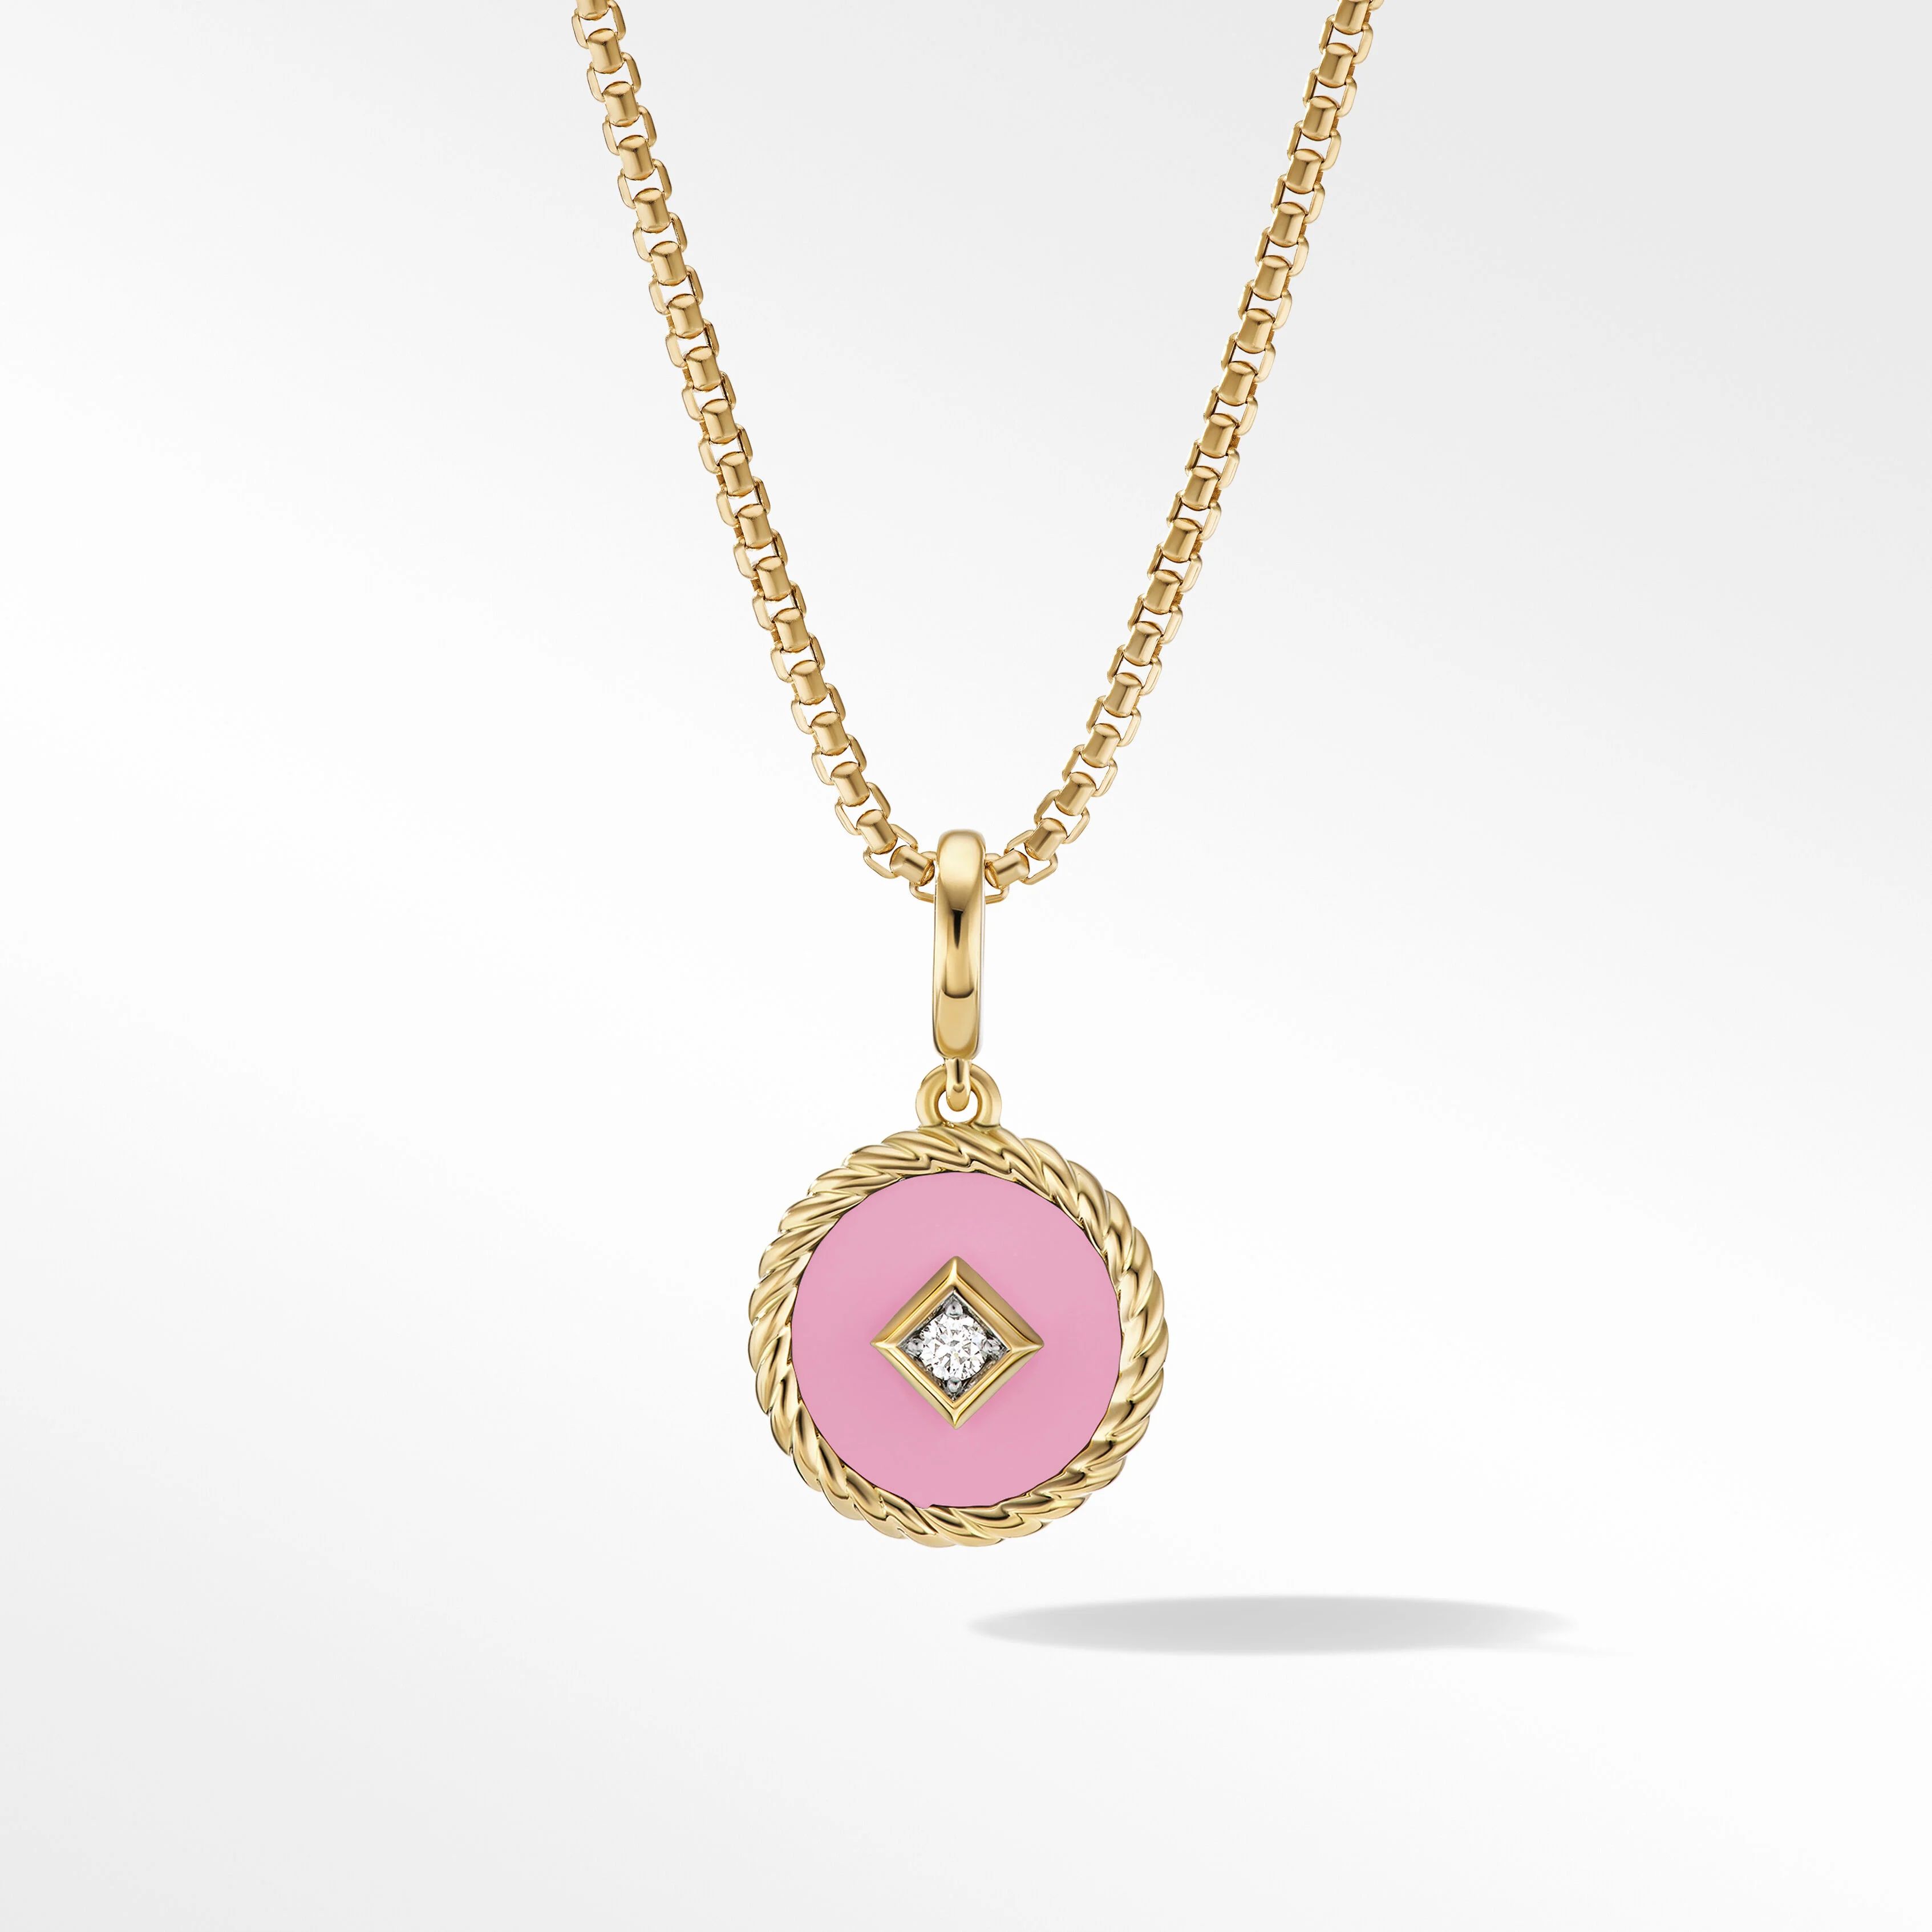 Cable Collectibles® Blush Enamel Charm in 18K Yellow Gold with Center Diamond | David Yurman